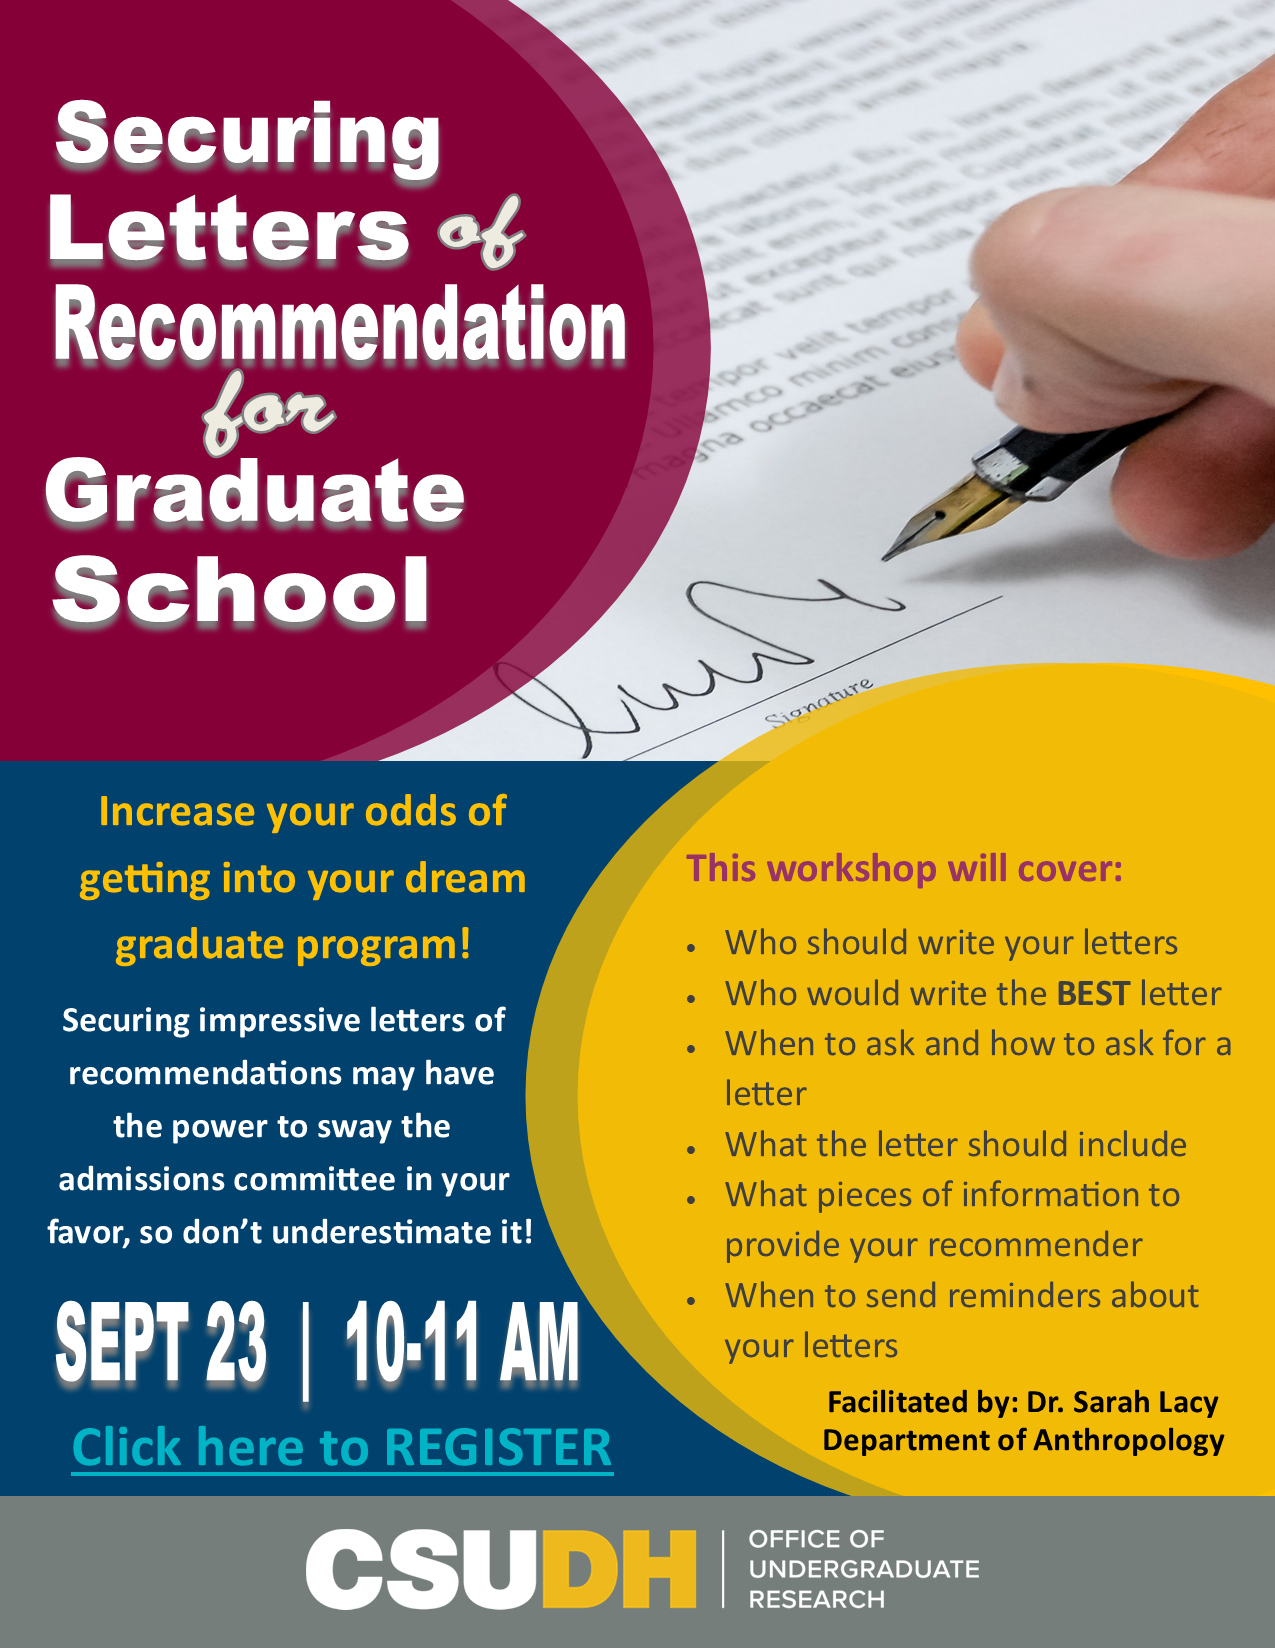 Securing Letters of Recommendation for Graduate School Flyer 9-23-21